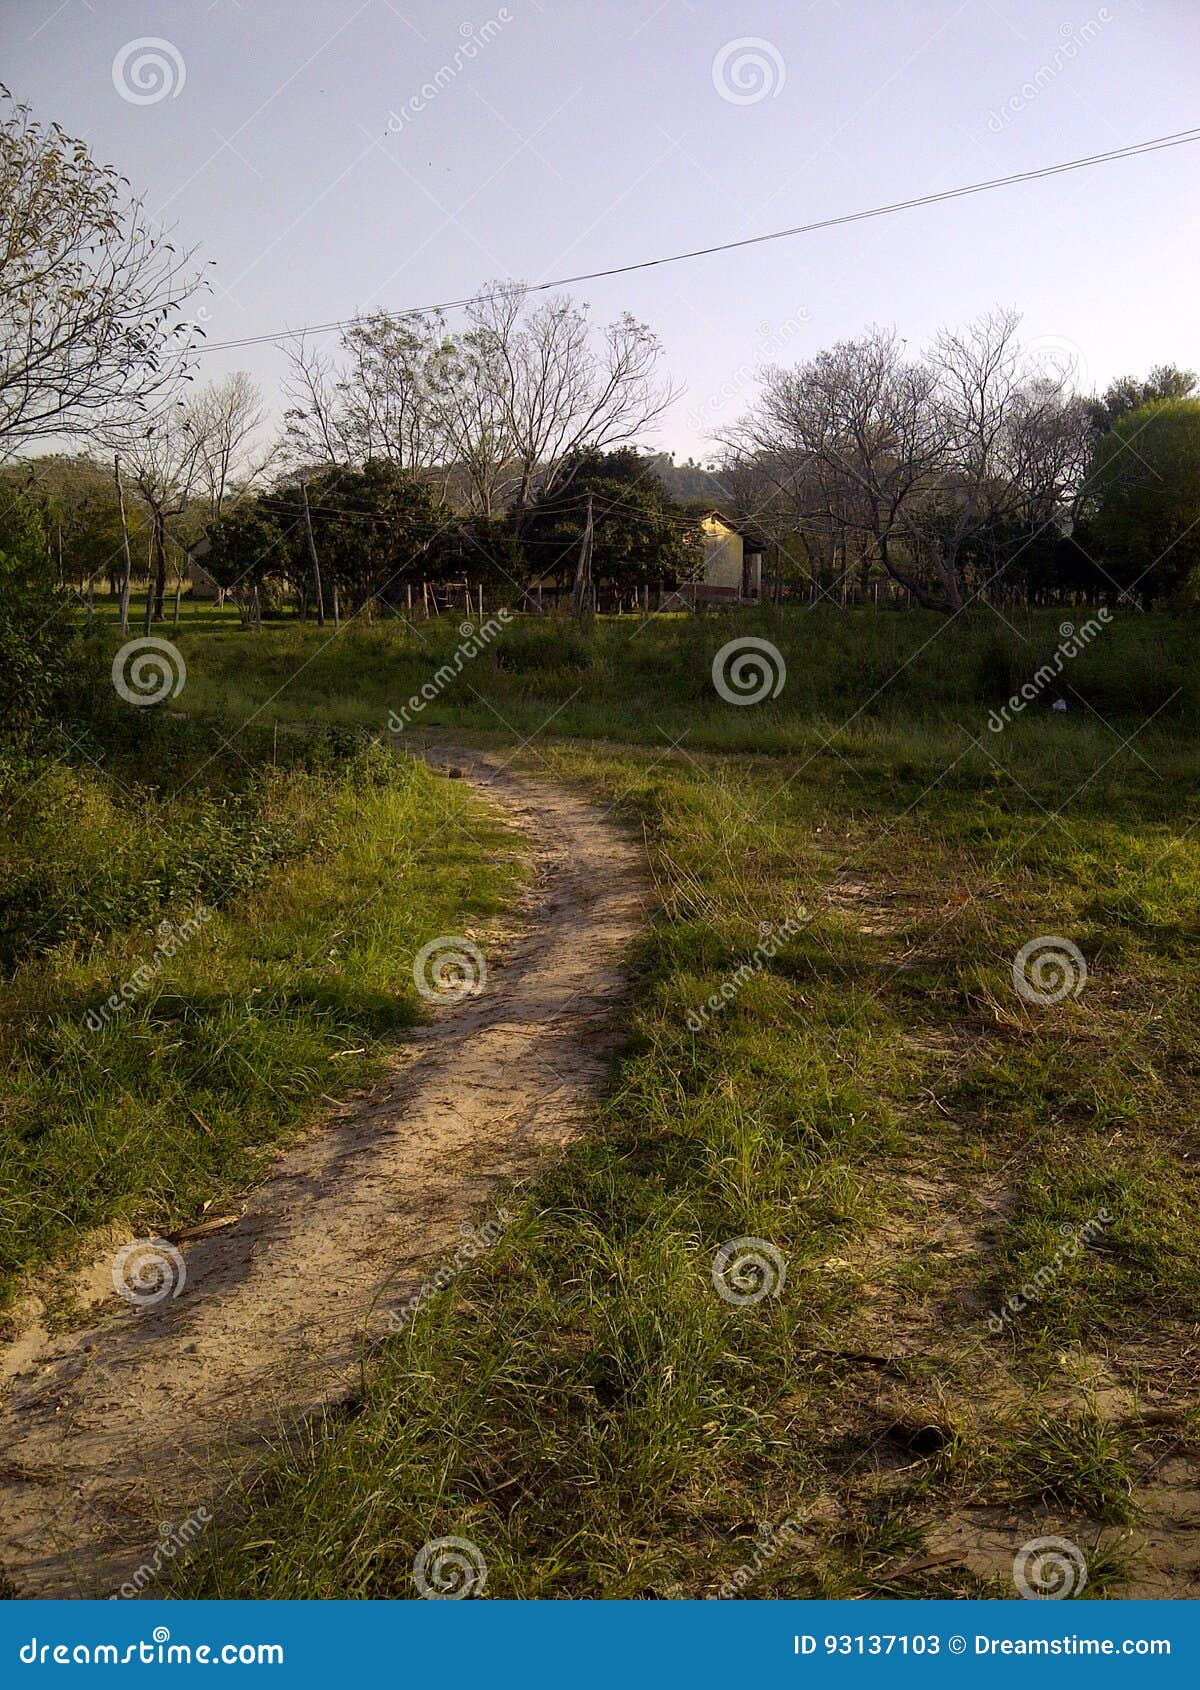 rural road, rural environment with rural population